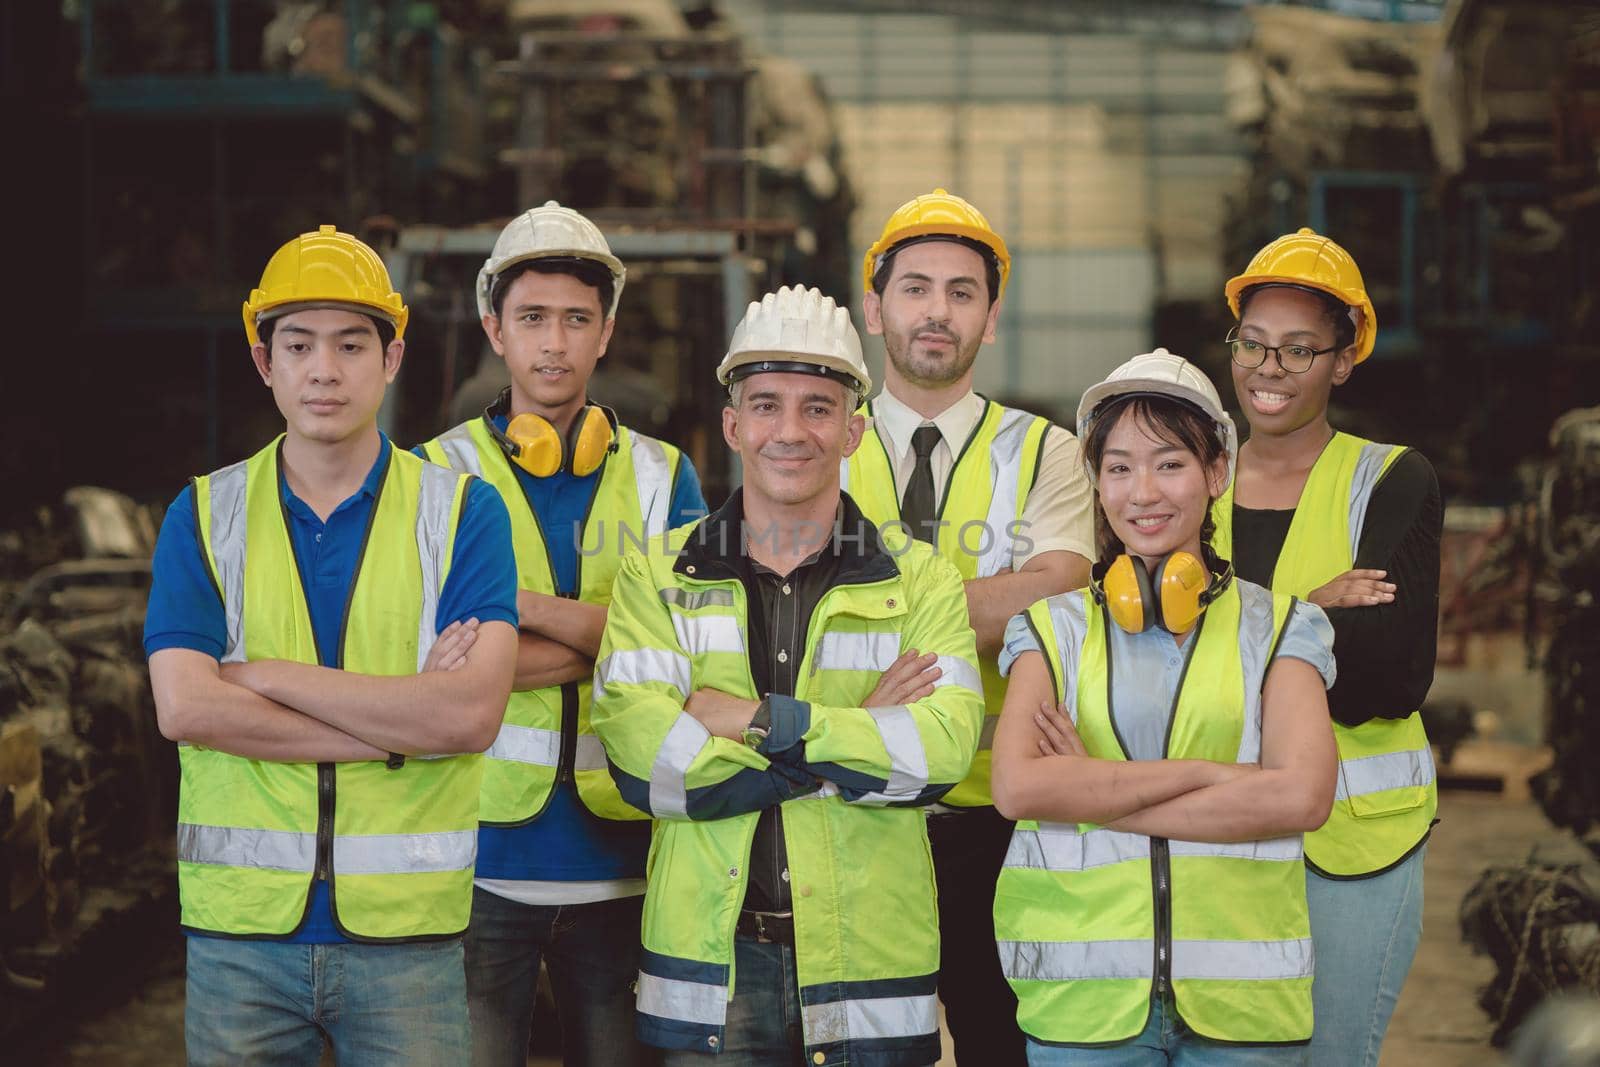 Group of industry people worker engineer team mix race enjoy working in heavy factory standing together happy smile portrait confidence teamwork company arm crossed